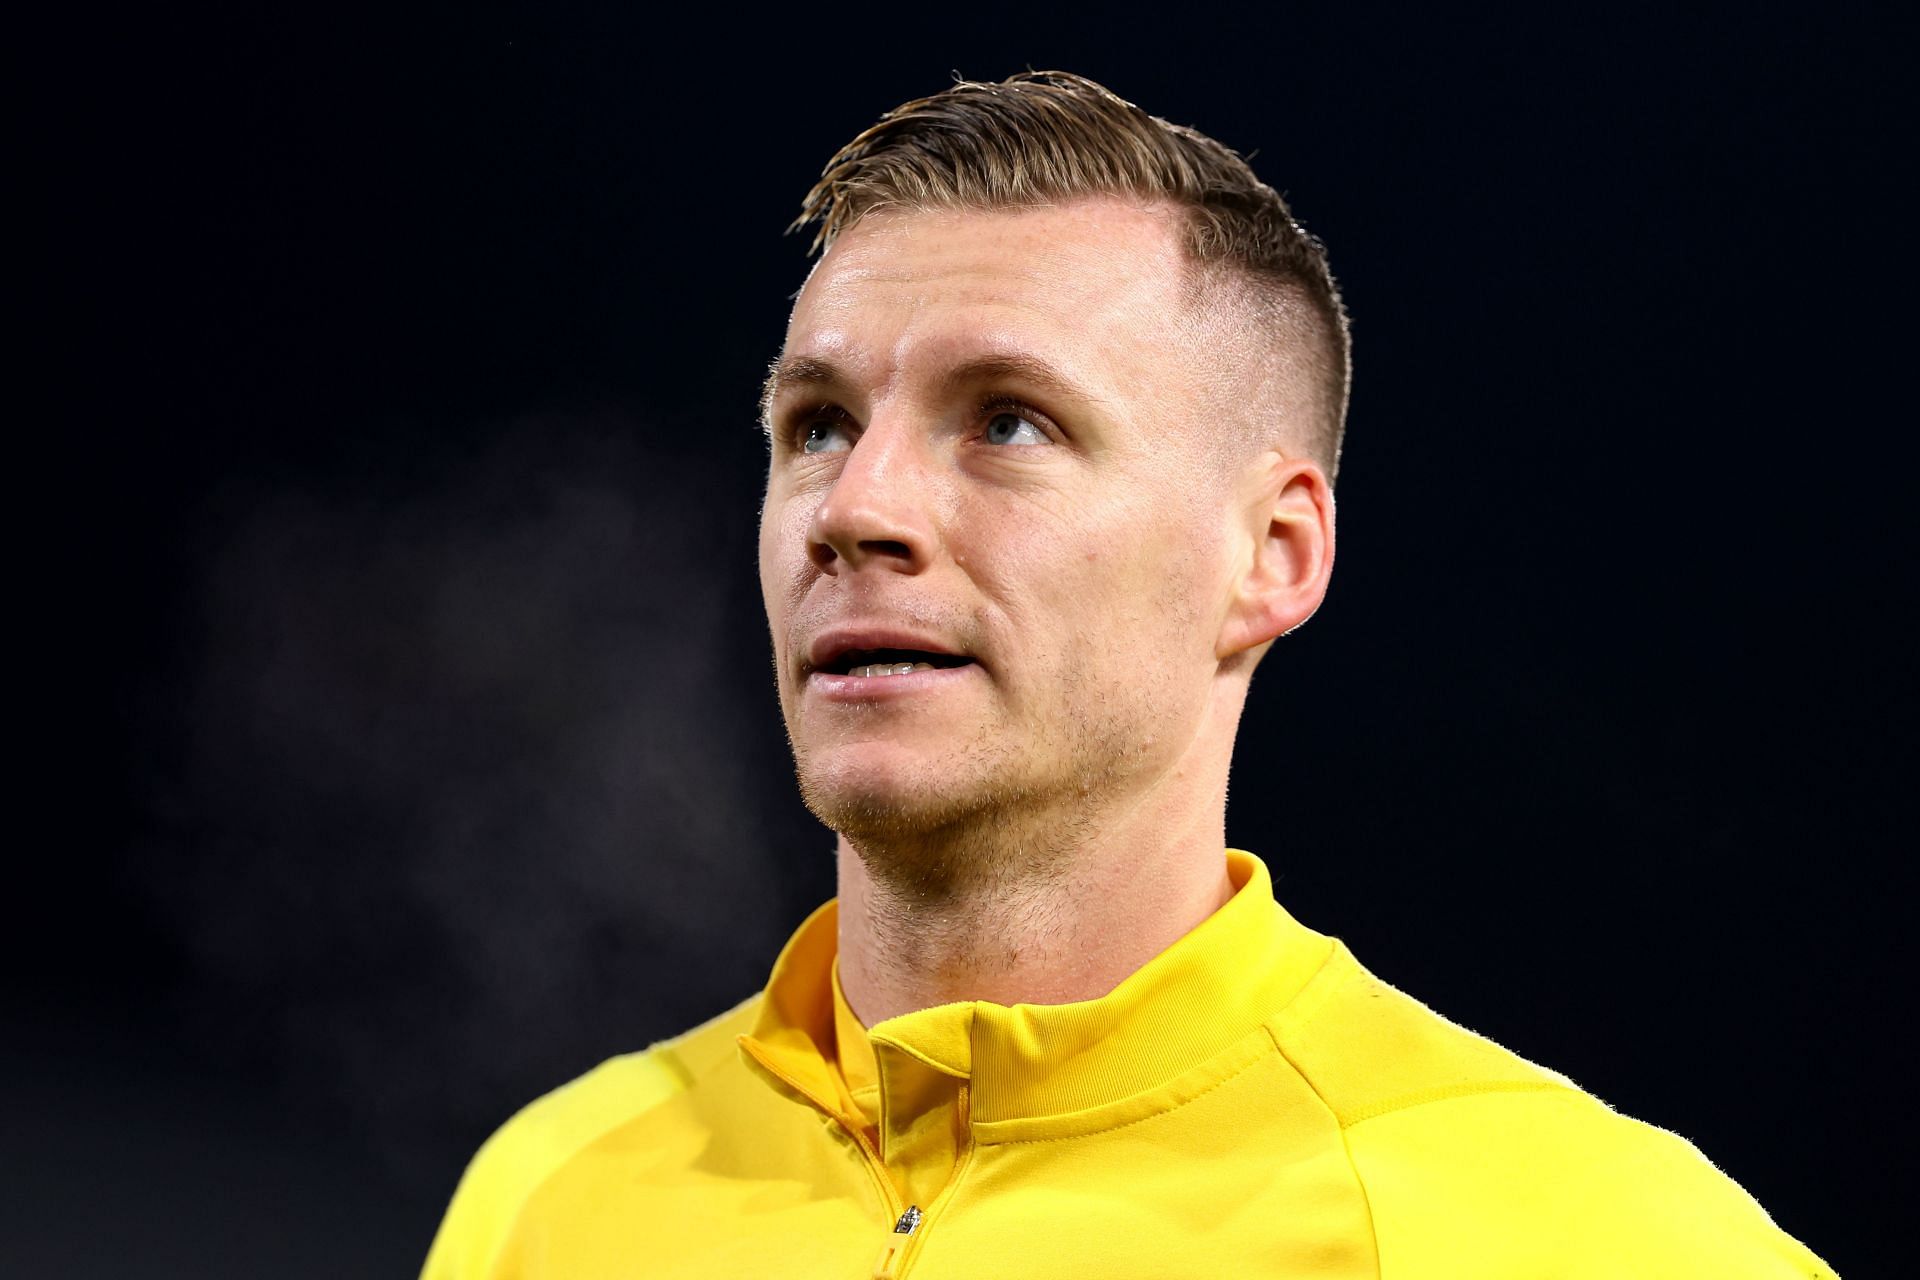 Ex-Arsenal star Bernd Leno kicks TV camera in fury after Fulham concede third goal in 4-0 loss against Manchester City 